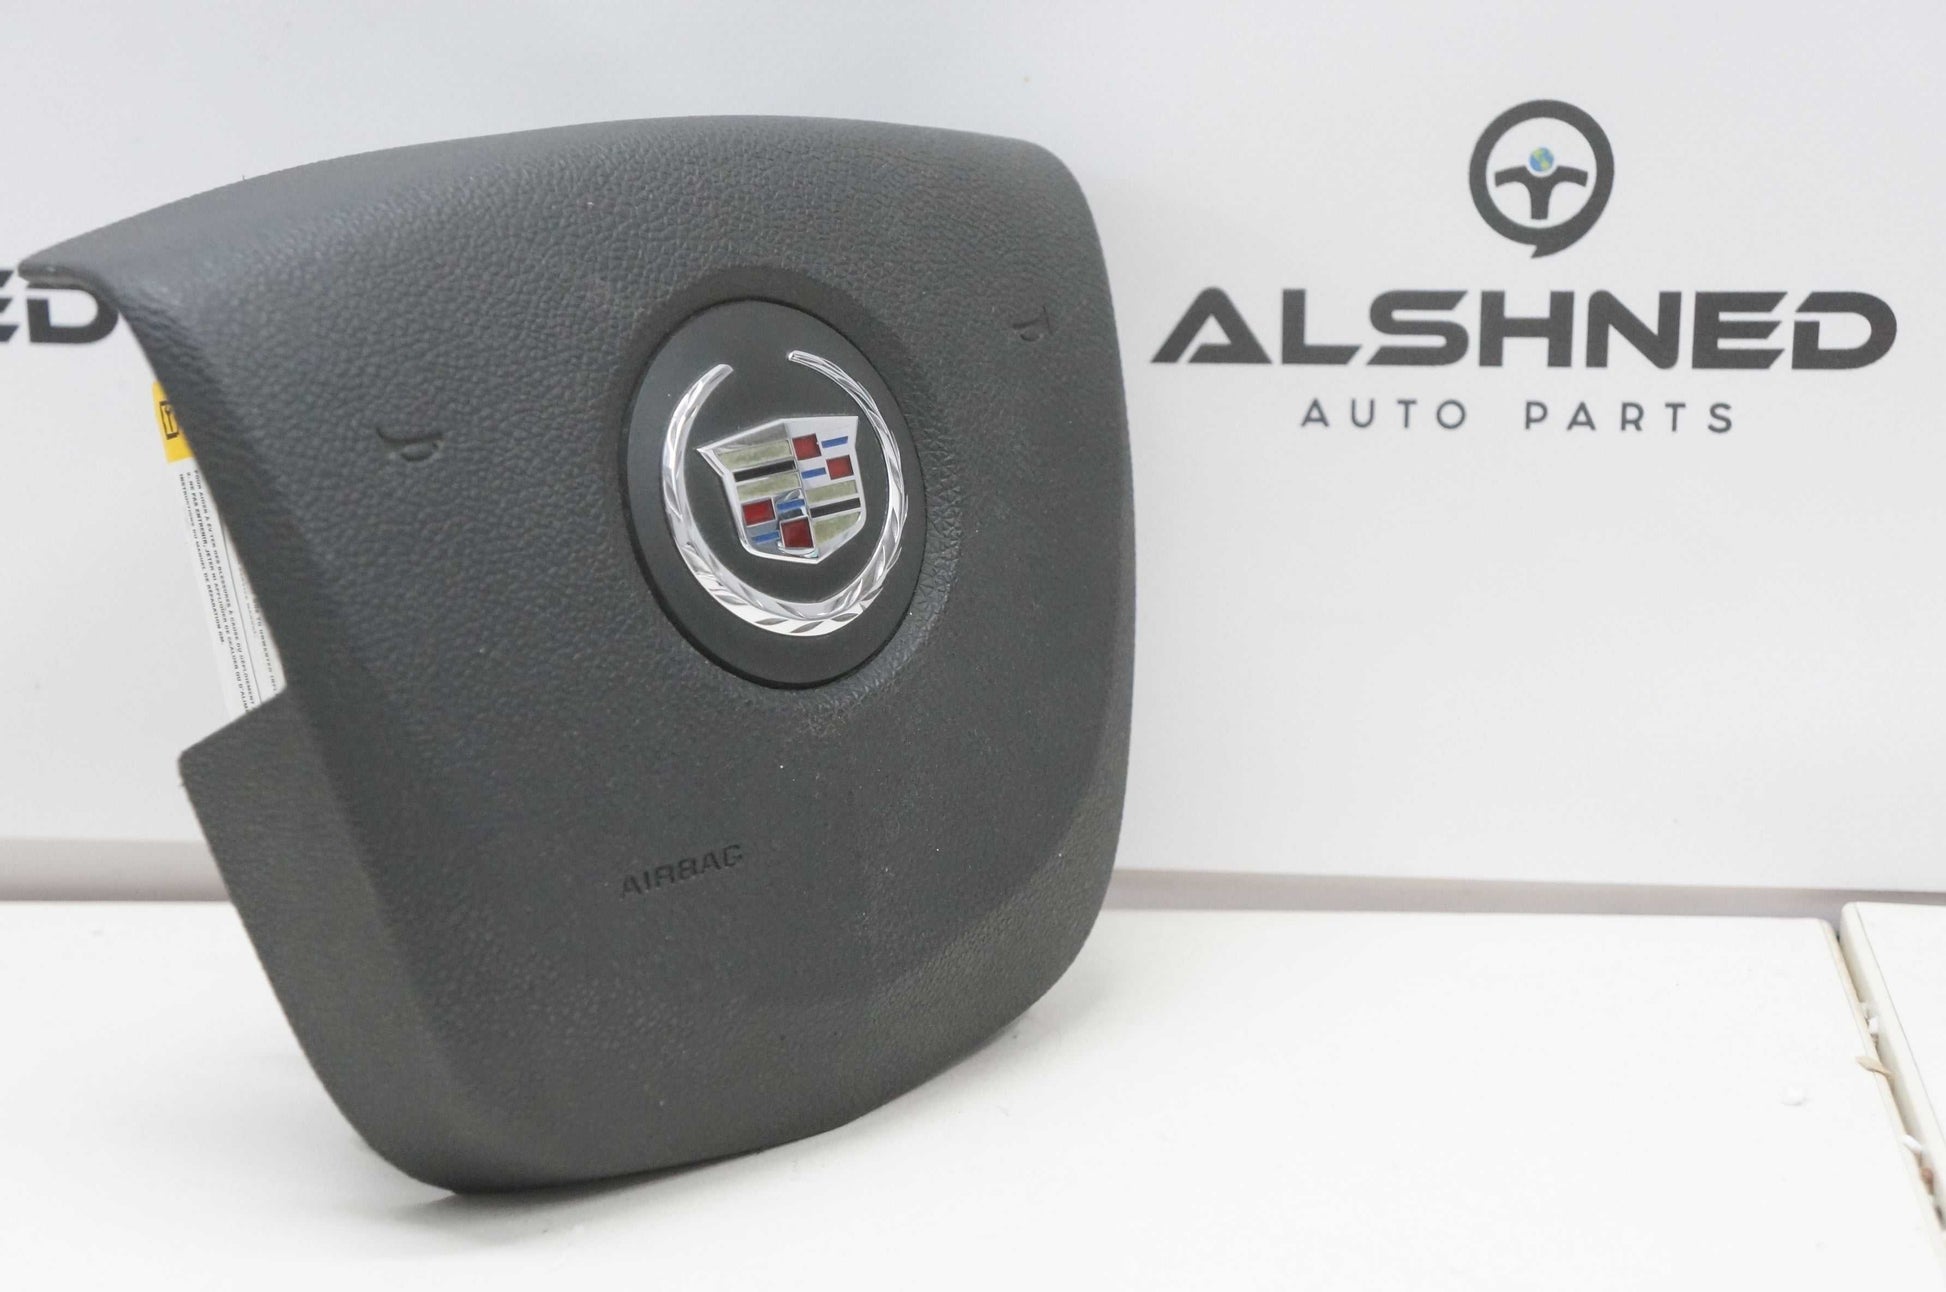 2011-2015 Cadillac CTS Driver Steering Wheel Airbag Air Bag OEM 20936094 Alshned Auto Parts